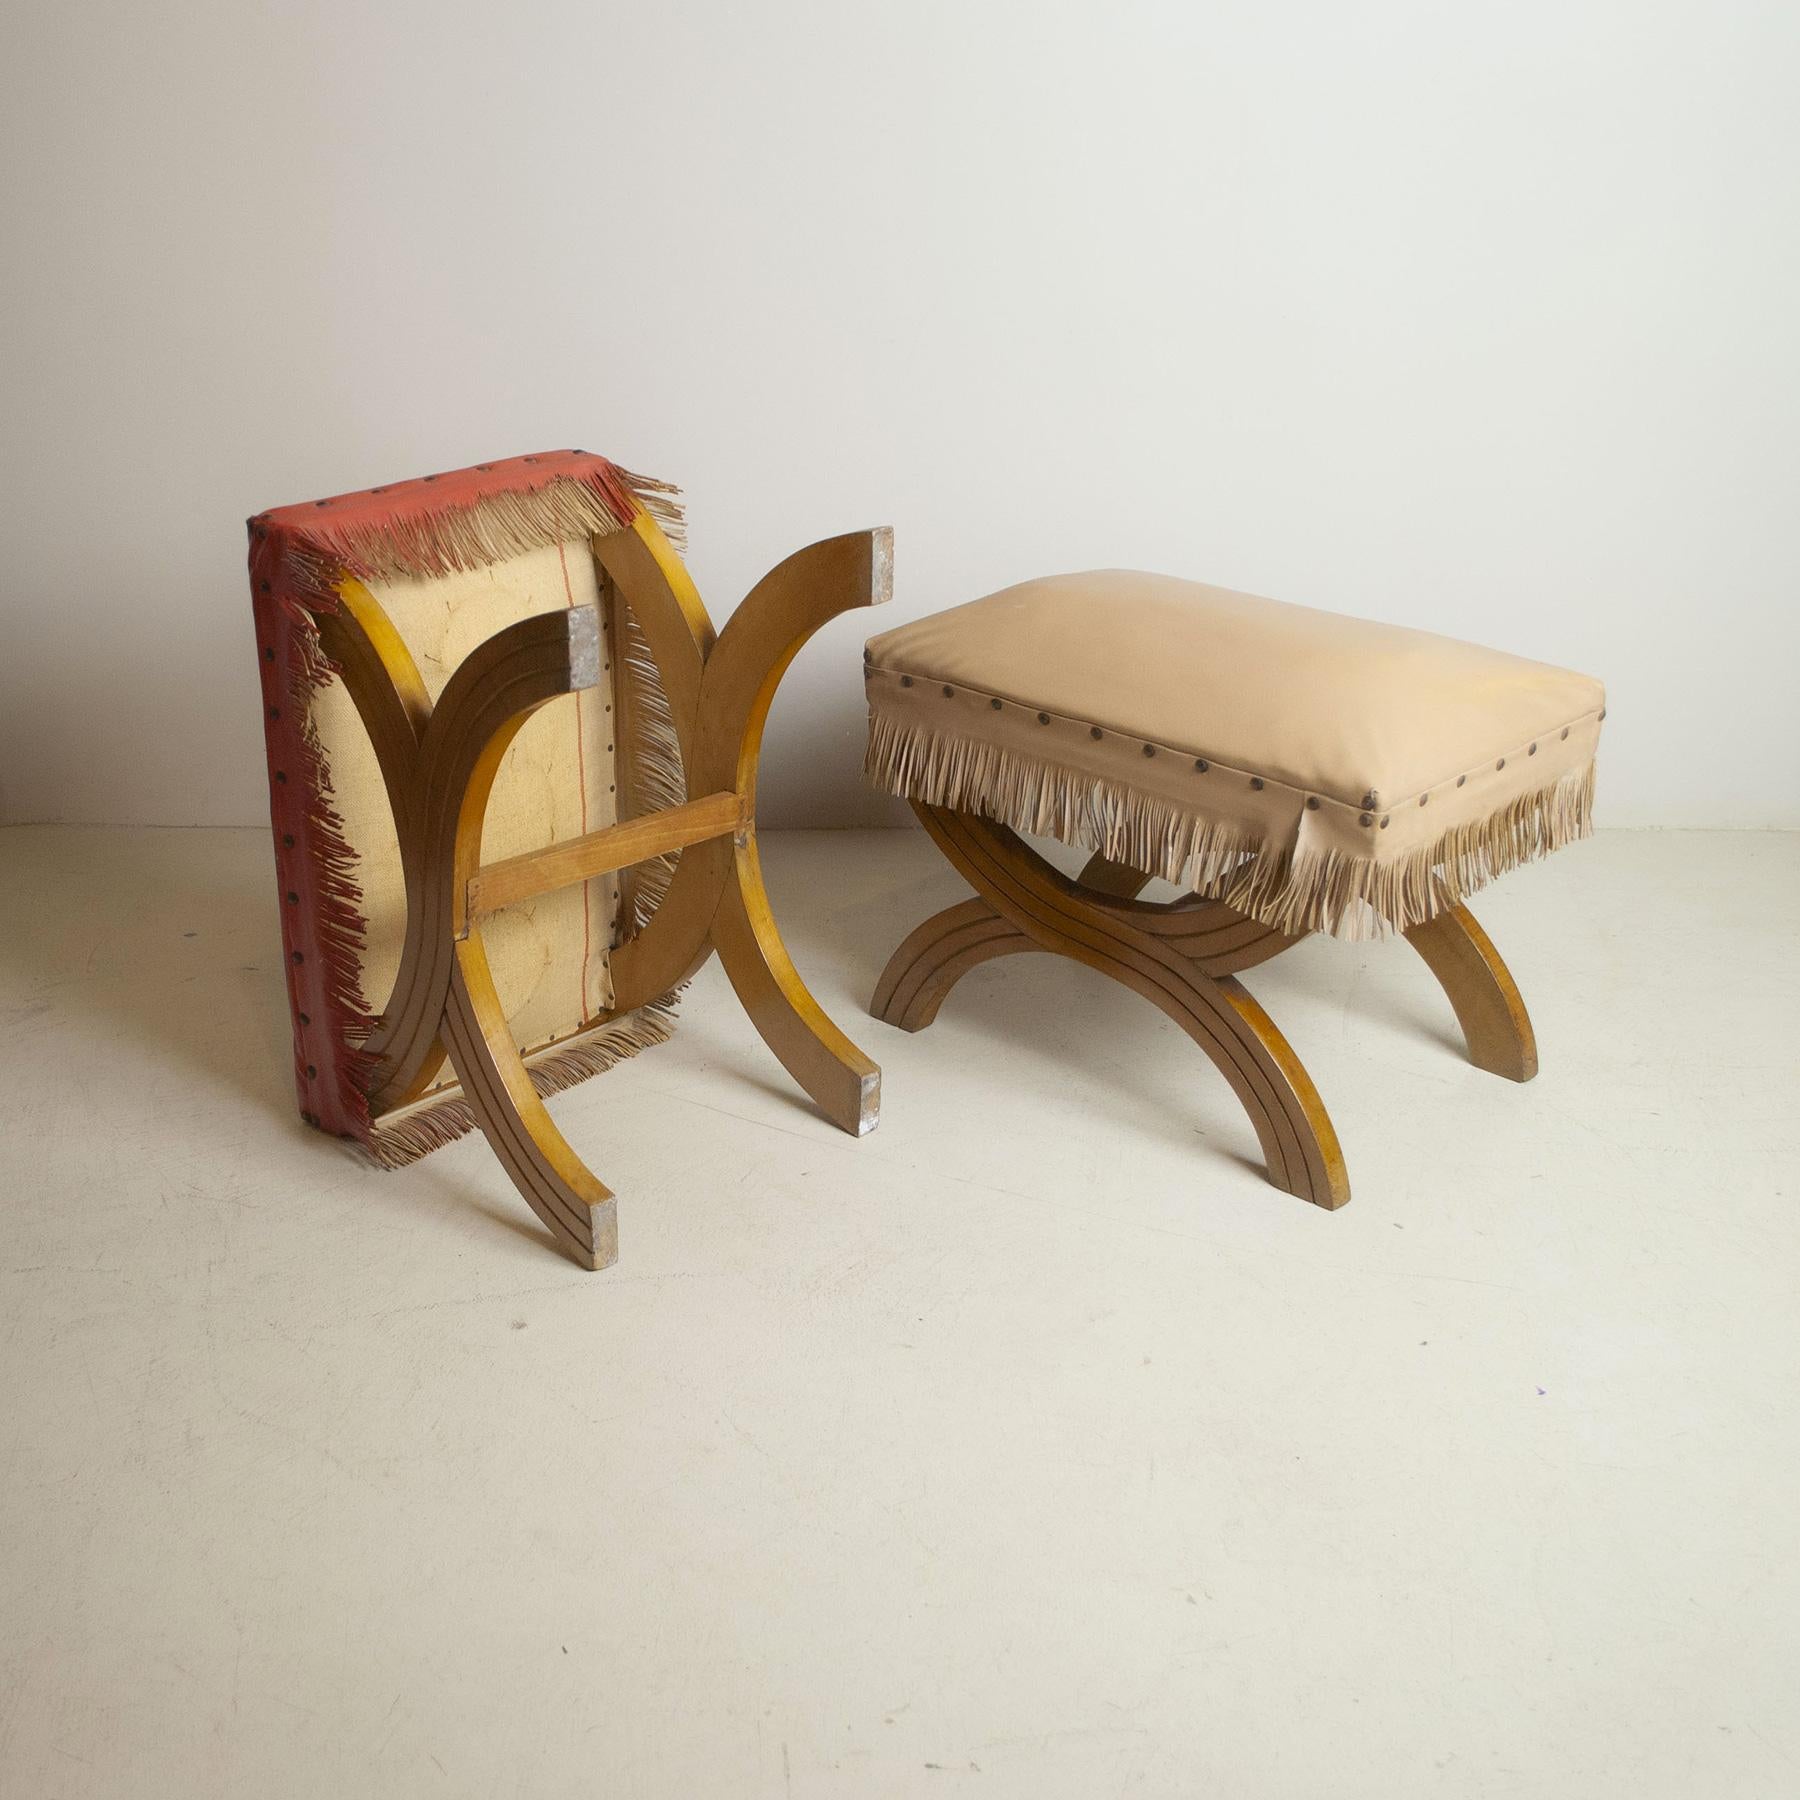 Gio Ponti in the Style Pair of Wooden Stools from the 1960s For Sale 1